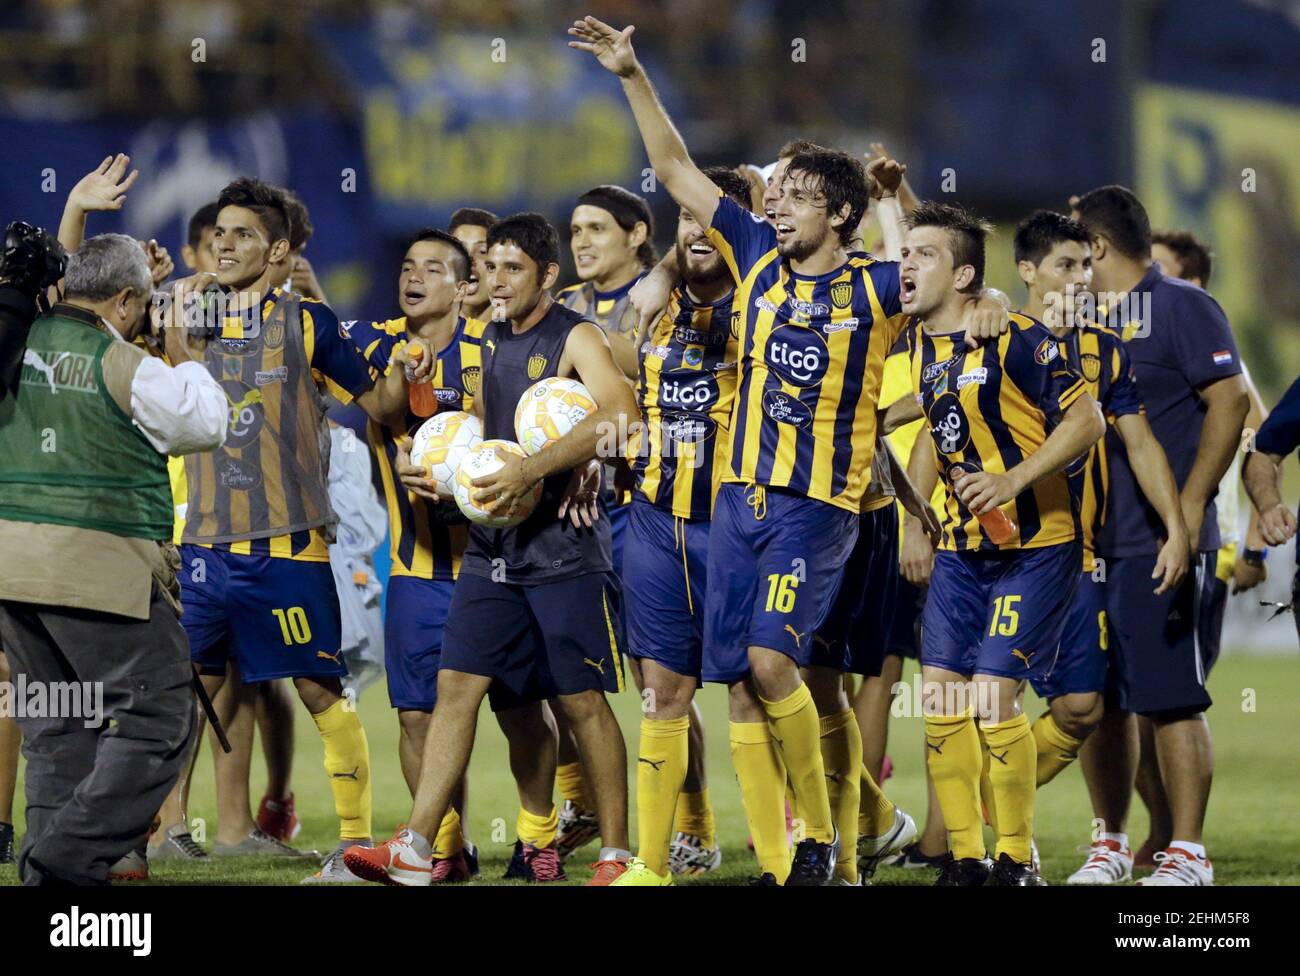 Players of Paraguay's Sportivo Luqueno celebrates after winning against Brazil's Atletico Paranaense during Copa Sudamericana soccer match at the Feliciano Caceres stadium in Luque, Paraguay, October 28, 2015. REUTERS/Jorge Adorno   Picture Supplied by Action Images Stock Photo